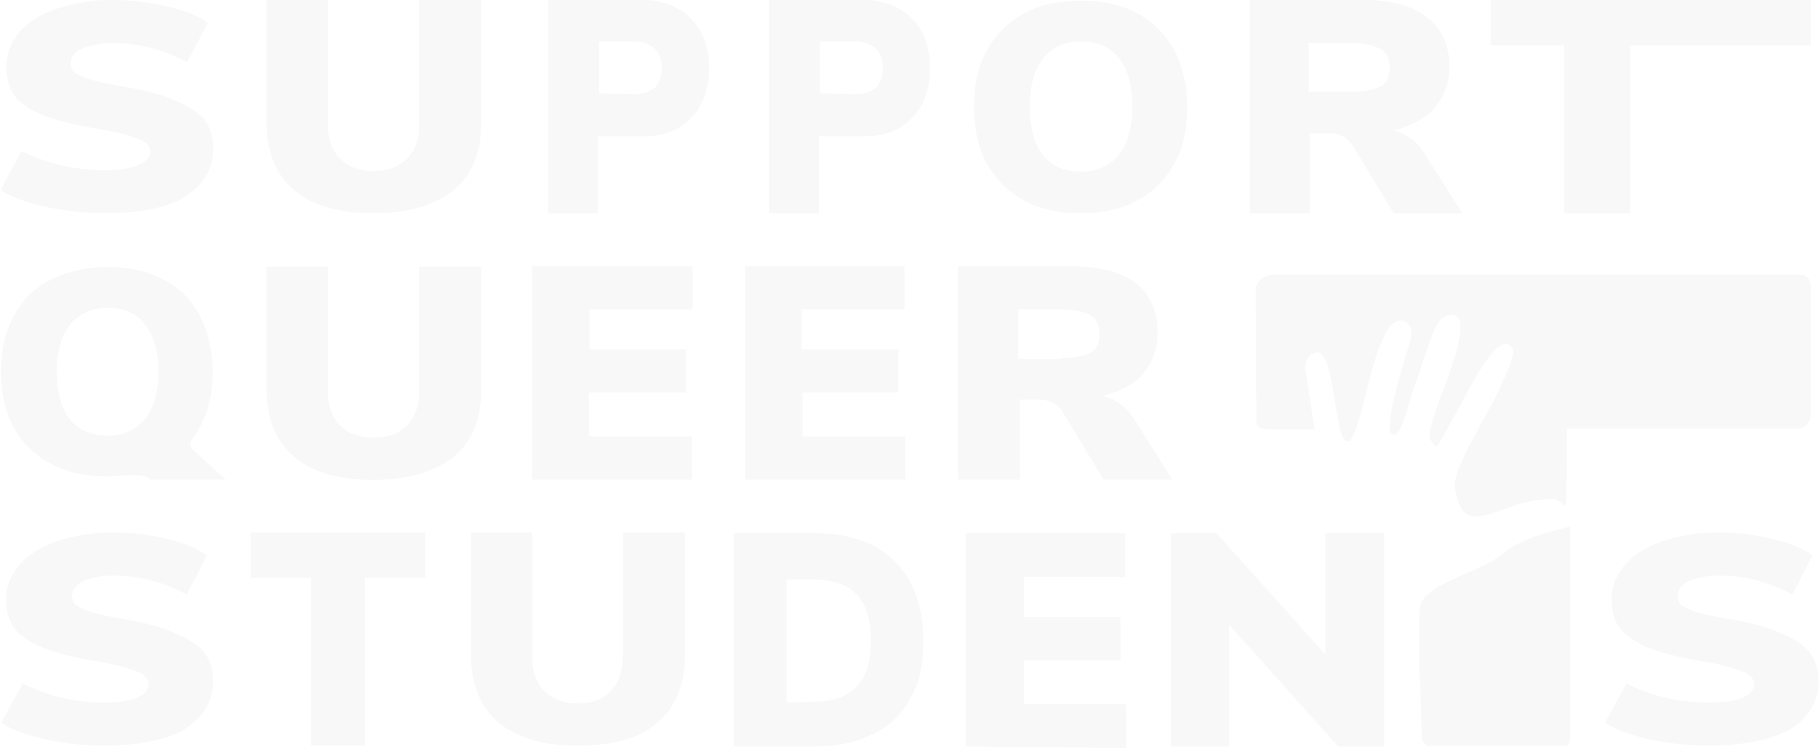 Support Queer Students